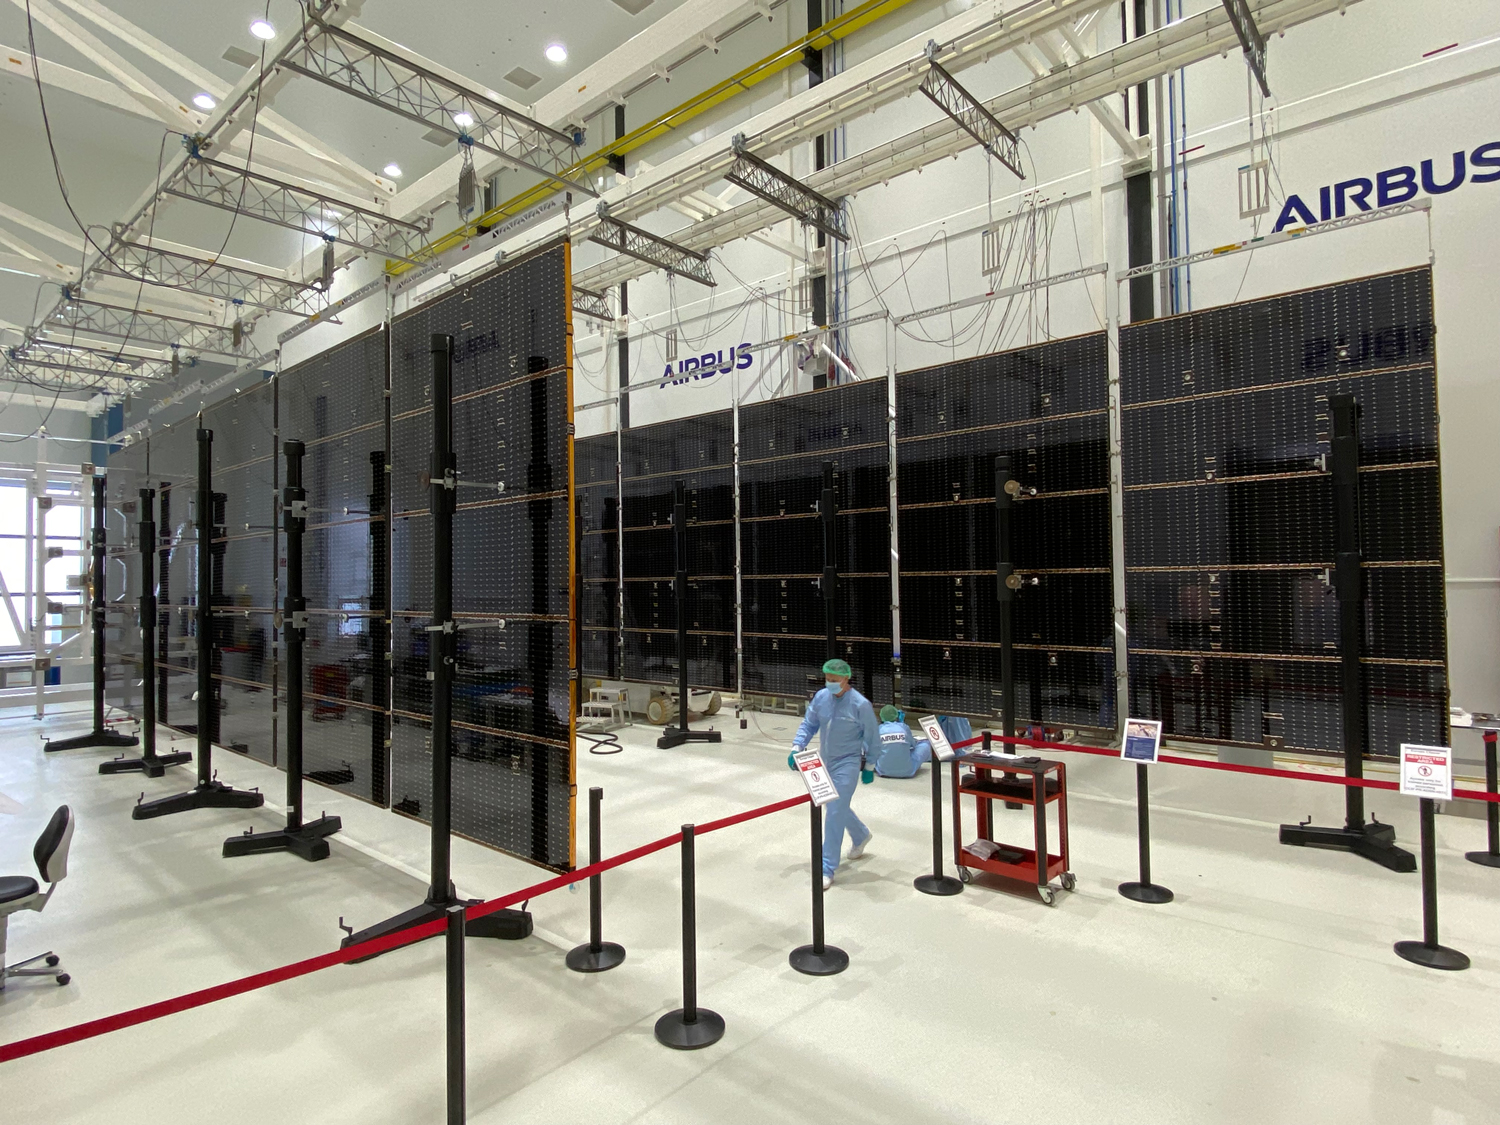 The spacecraft’s large solar array wings take up the majority of this image. They are parallel to each other in position and the image is taken at angle, so you can see the solar arrays extended into the background of the image. Each solar array wing consists of five panels connected to each other to form a long solar array wing that is approximately 46.5 feet (14.2 meters) long. Bronze colored lines are visible creating a grid pattern on each panel. Each solar array wing is hoisted several feet above the ground by support structures that attach to each solar array wing panel. The solar array wings are tall with an approximate height of 13.5 feet (4.1 meters). Walking between the solar array wings is an engineer wearing blue protective clothing. The engineer doesn’t even appear to come up to half the height of the solar array wings. The solar array wings are visible in a large white cleanroom, and the area with the wings is cordoned off with a red barrier. 